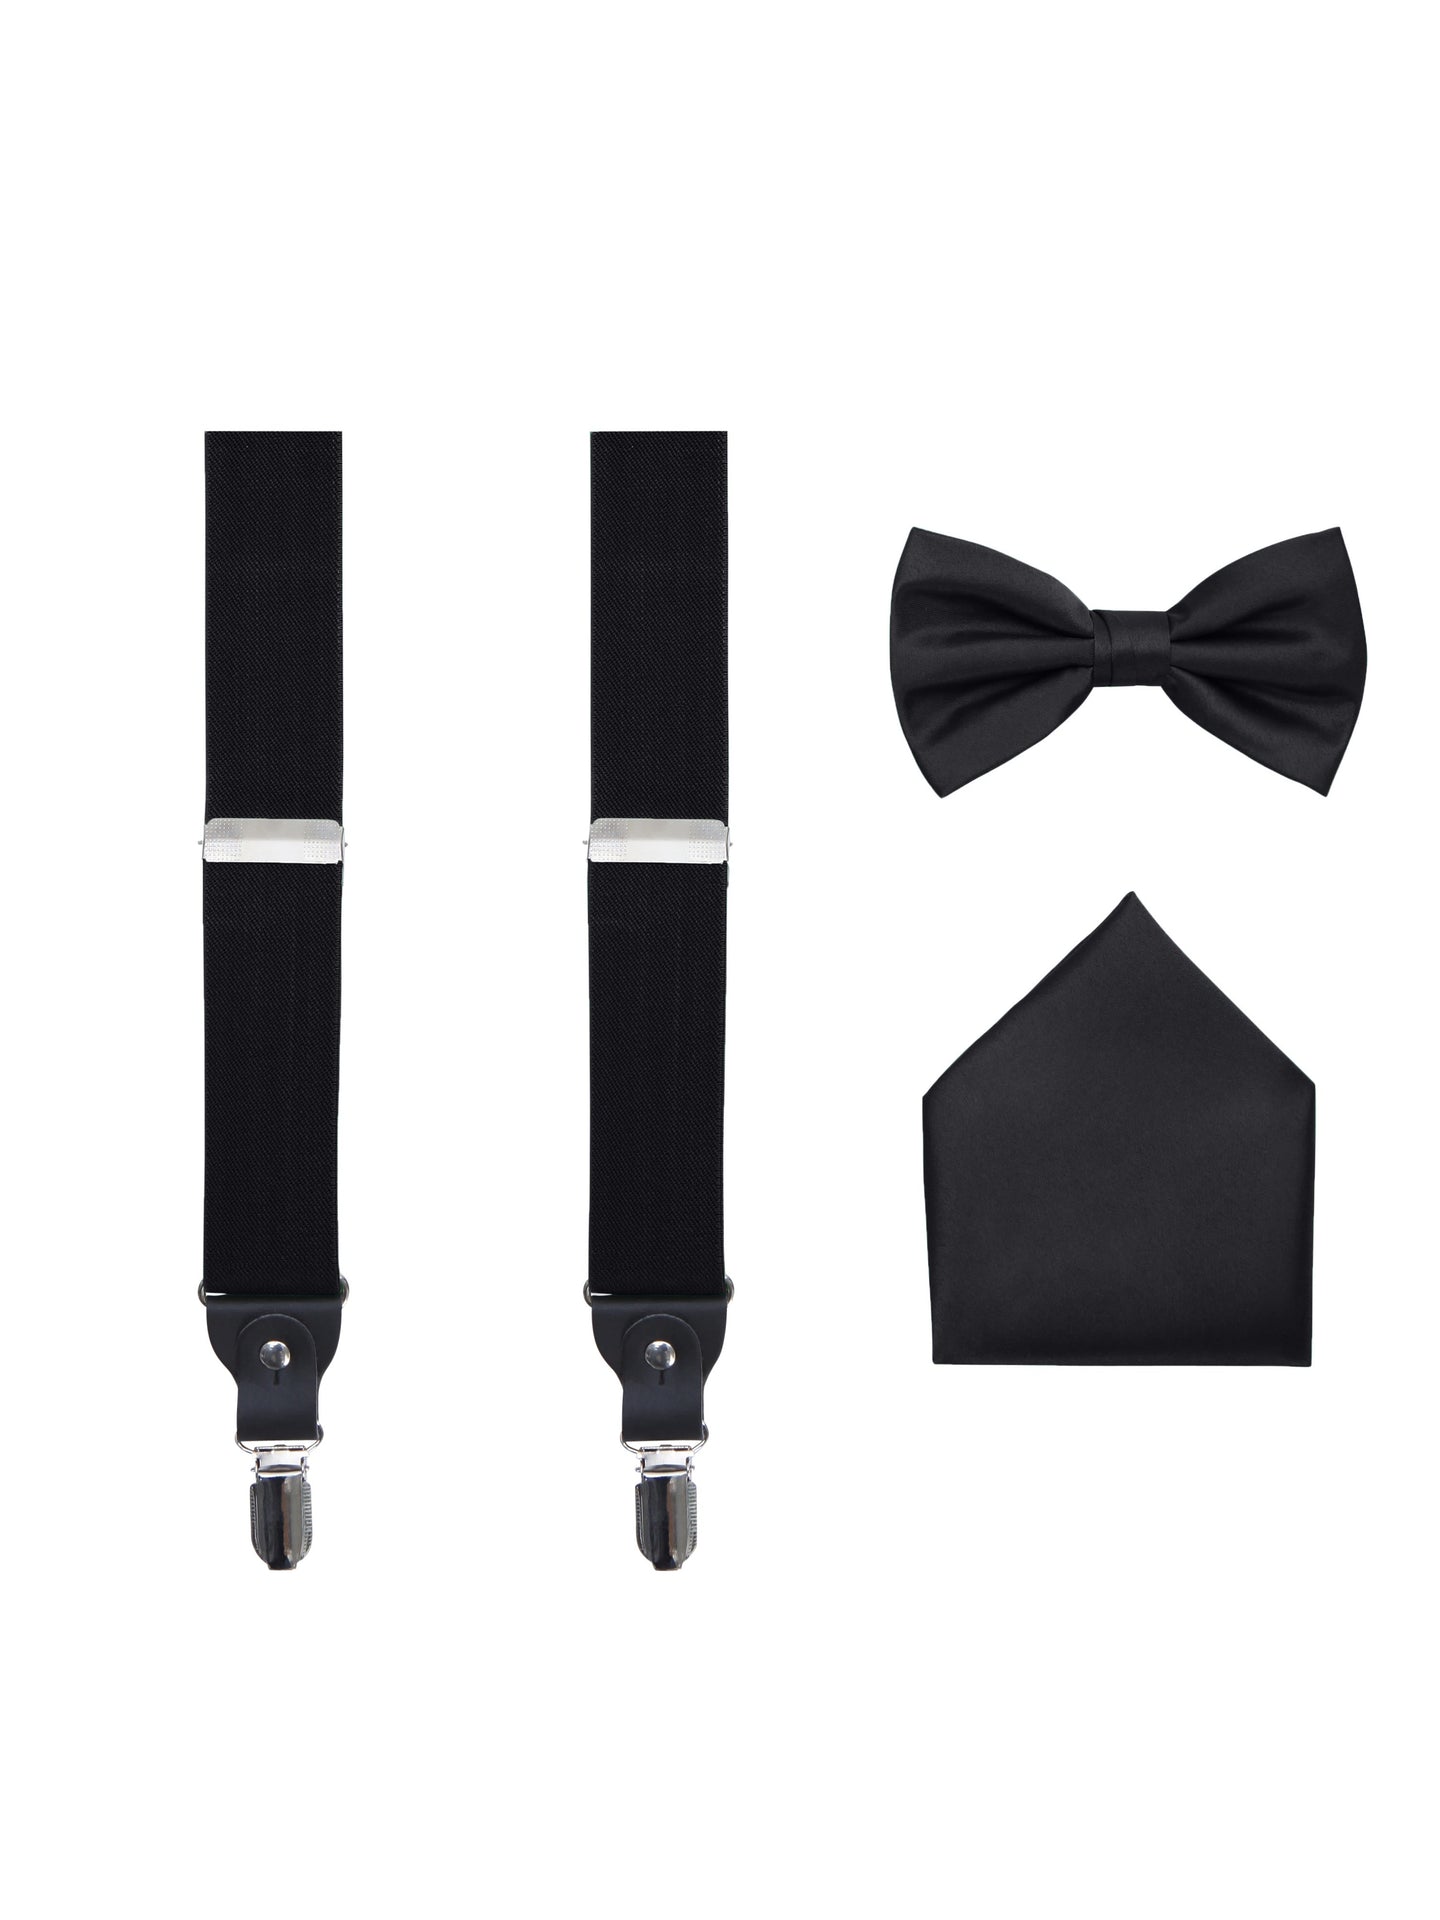 S.H. Churchill & Co. Men's 3 Piece Black Suspender Set - Includes Suspenders, Matching Bow Tie, Pocket Hanky and Gift Box